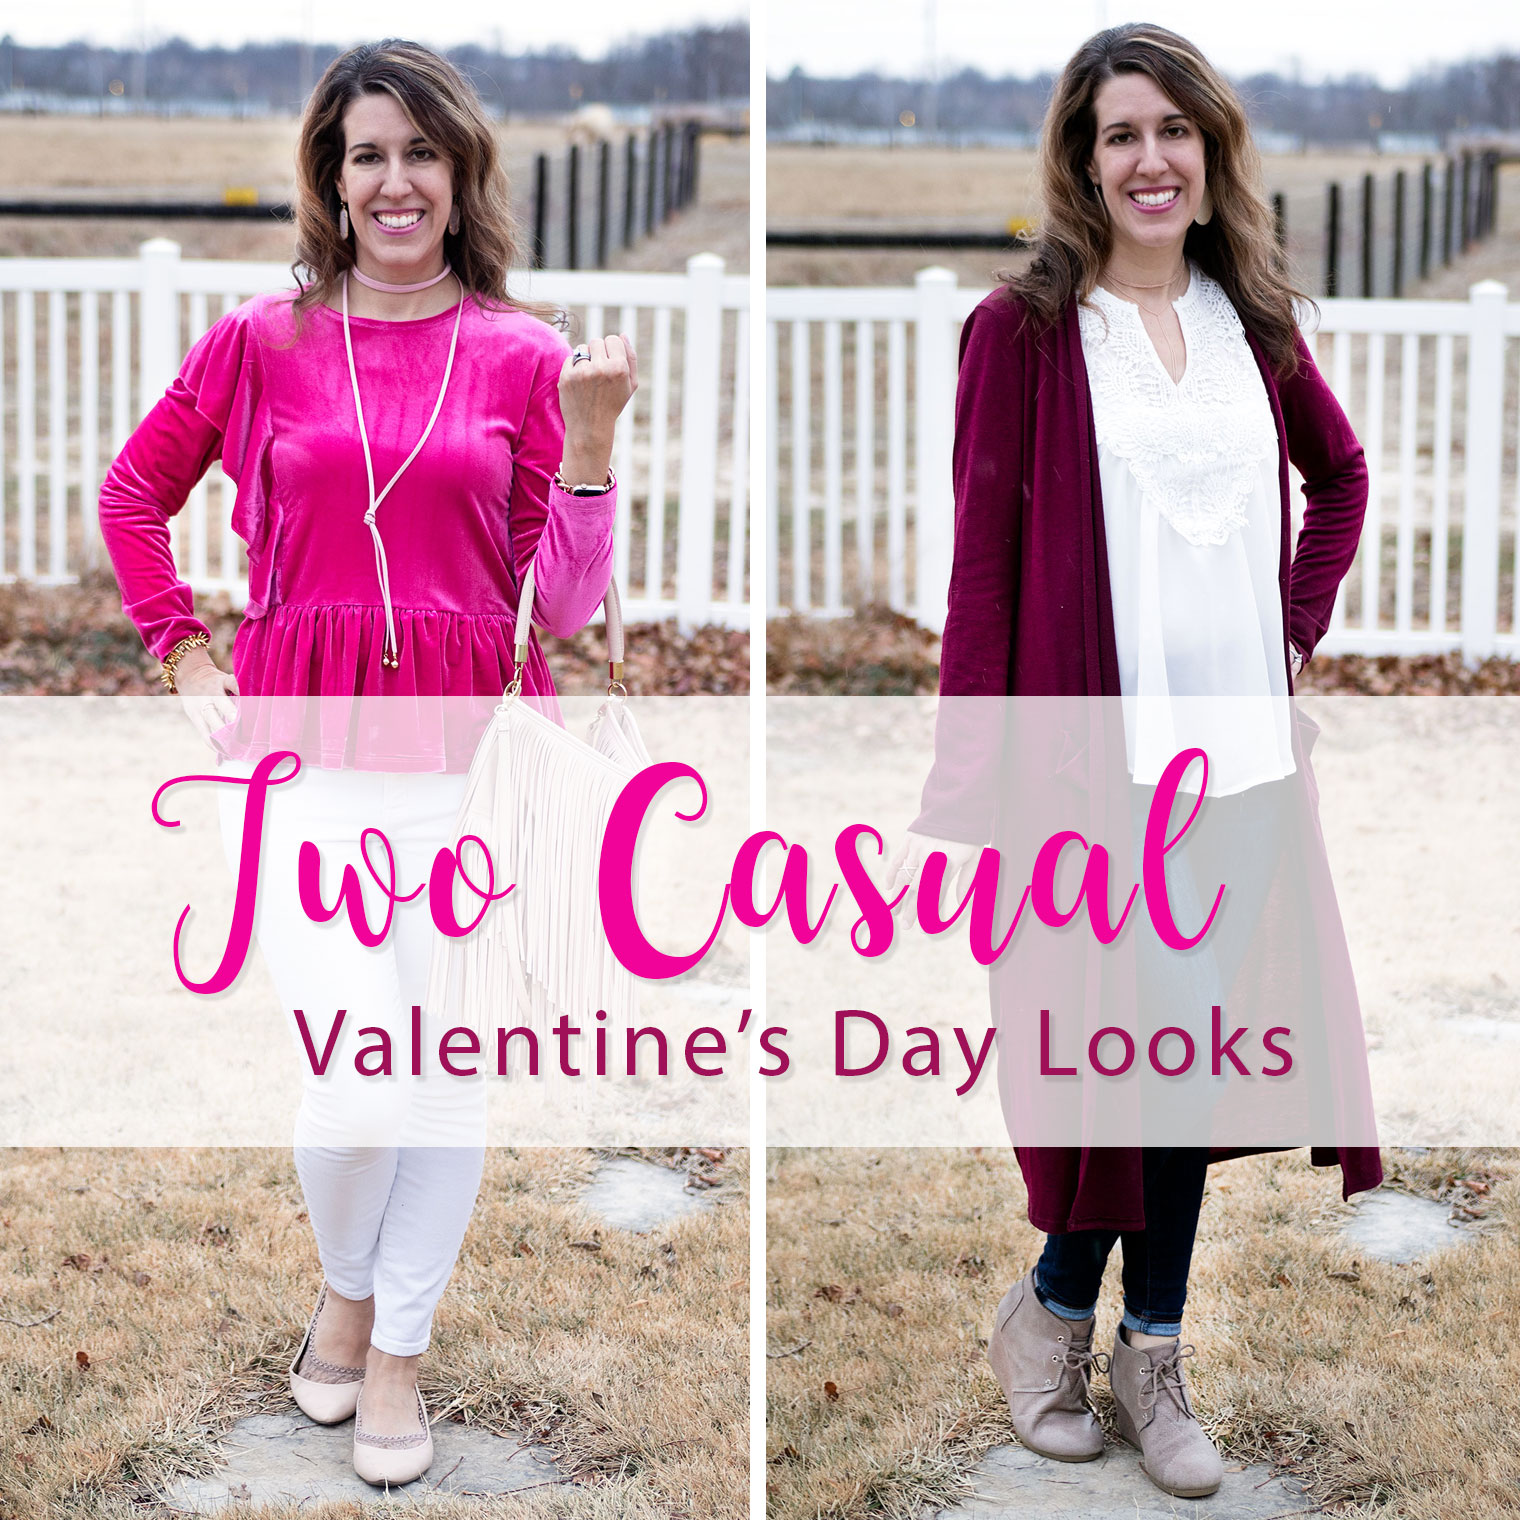 Styling the Tunic for a Casual Day for Jodie's Touch of Style